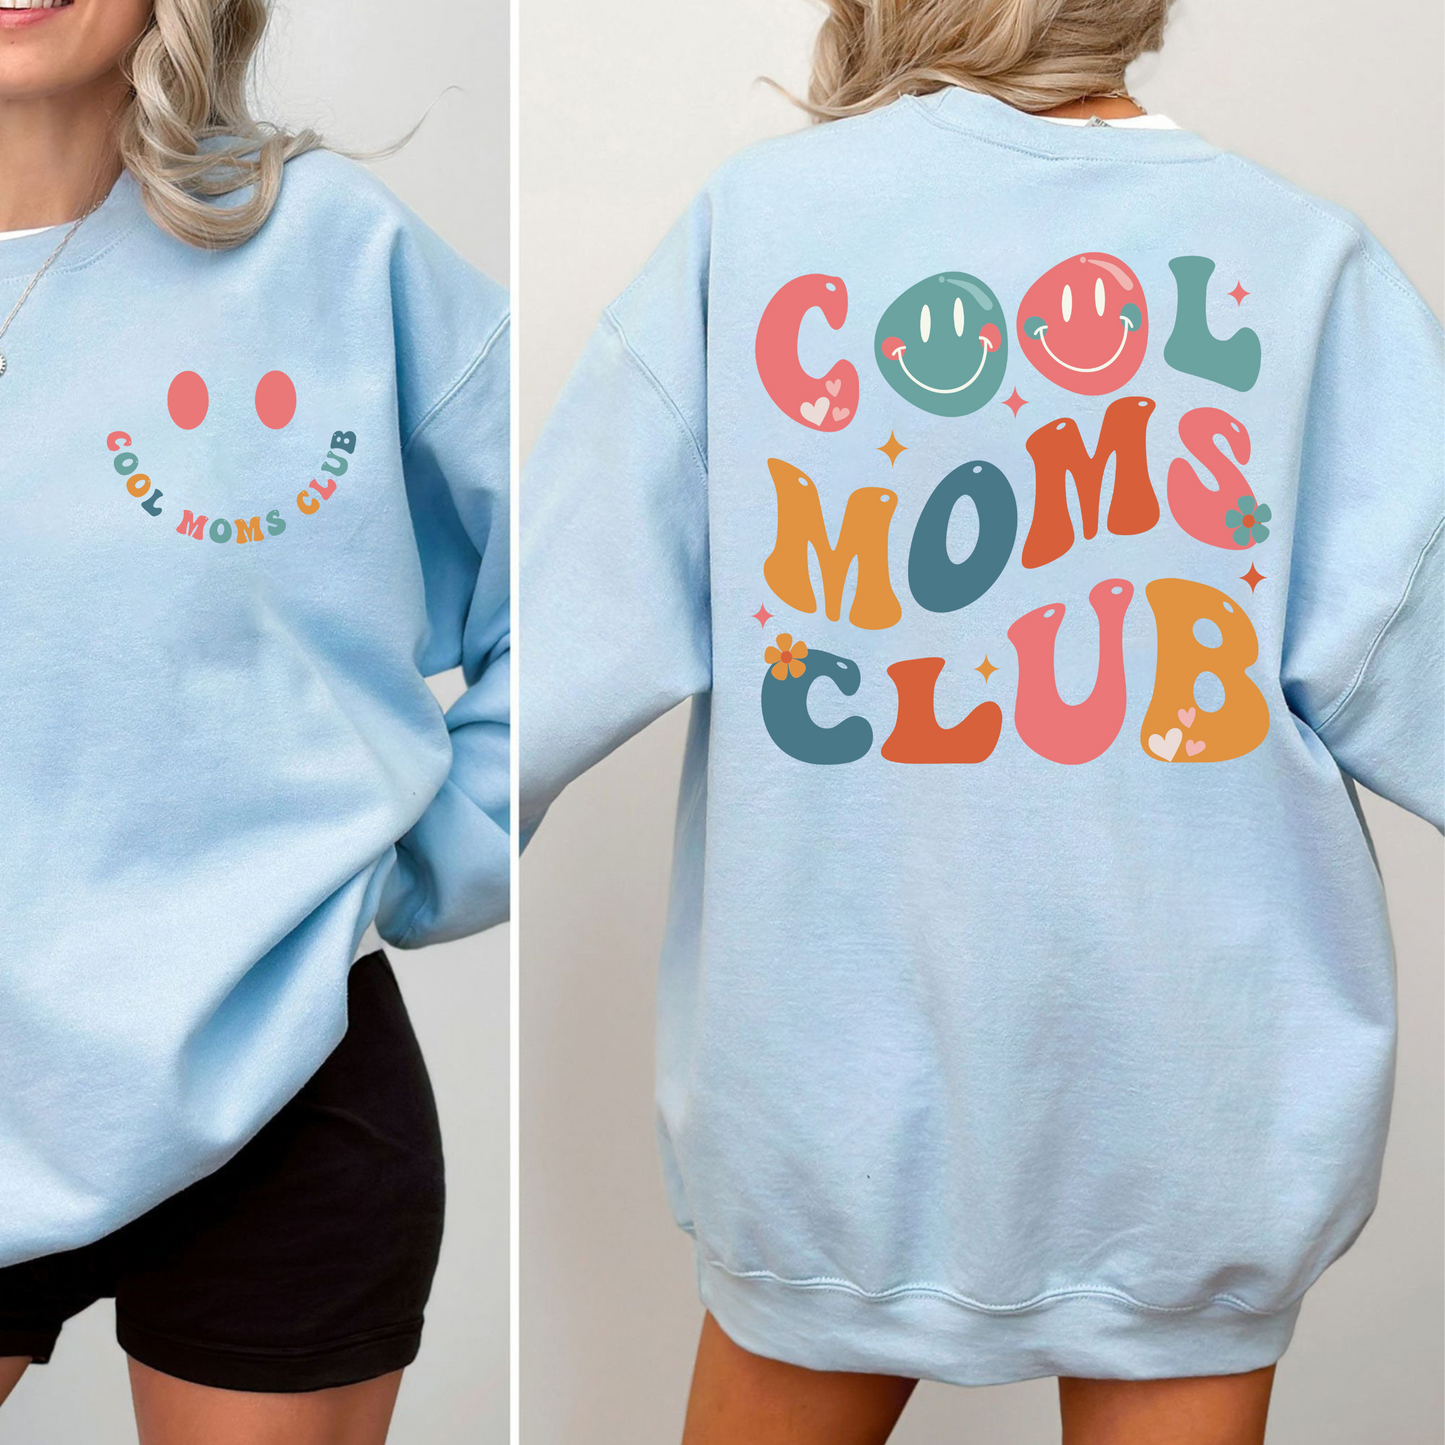 Cool Mom Club – Funny Gift for the Best Mom, Perfect for Mother's Day